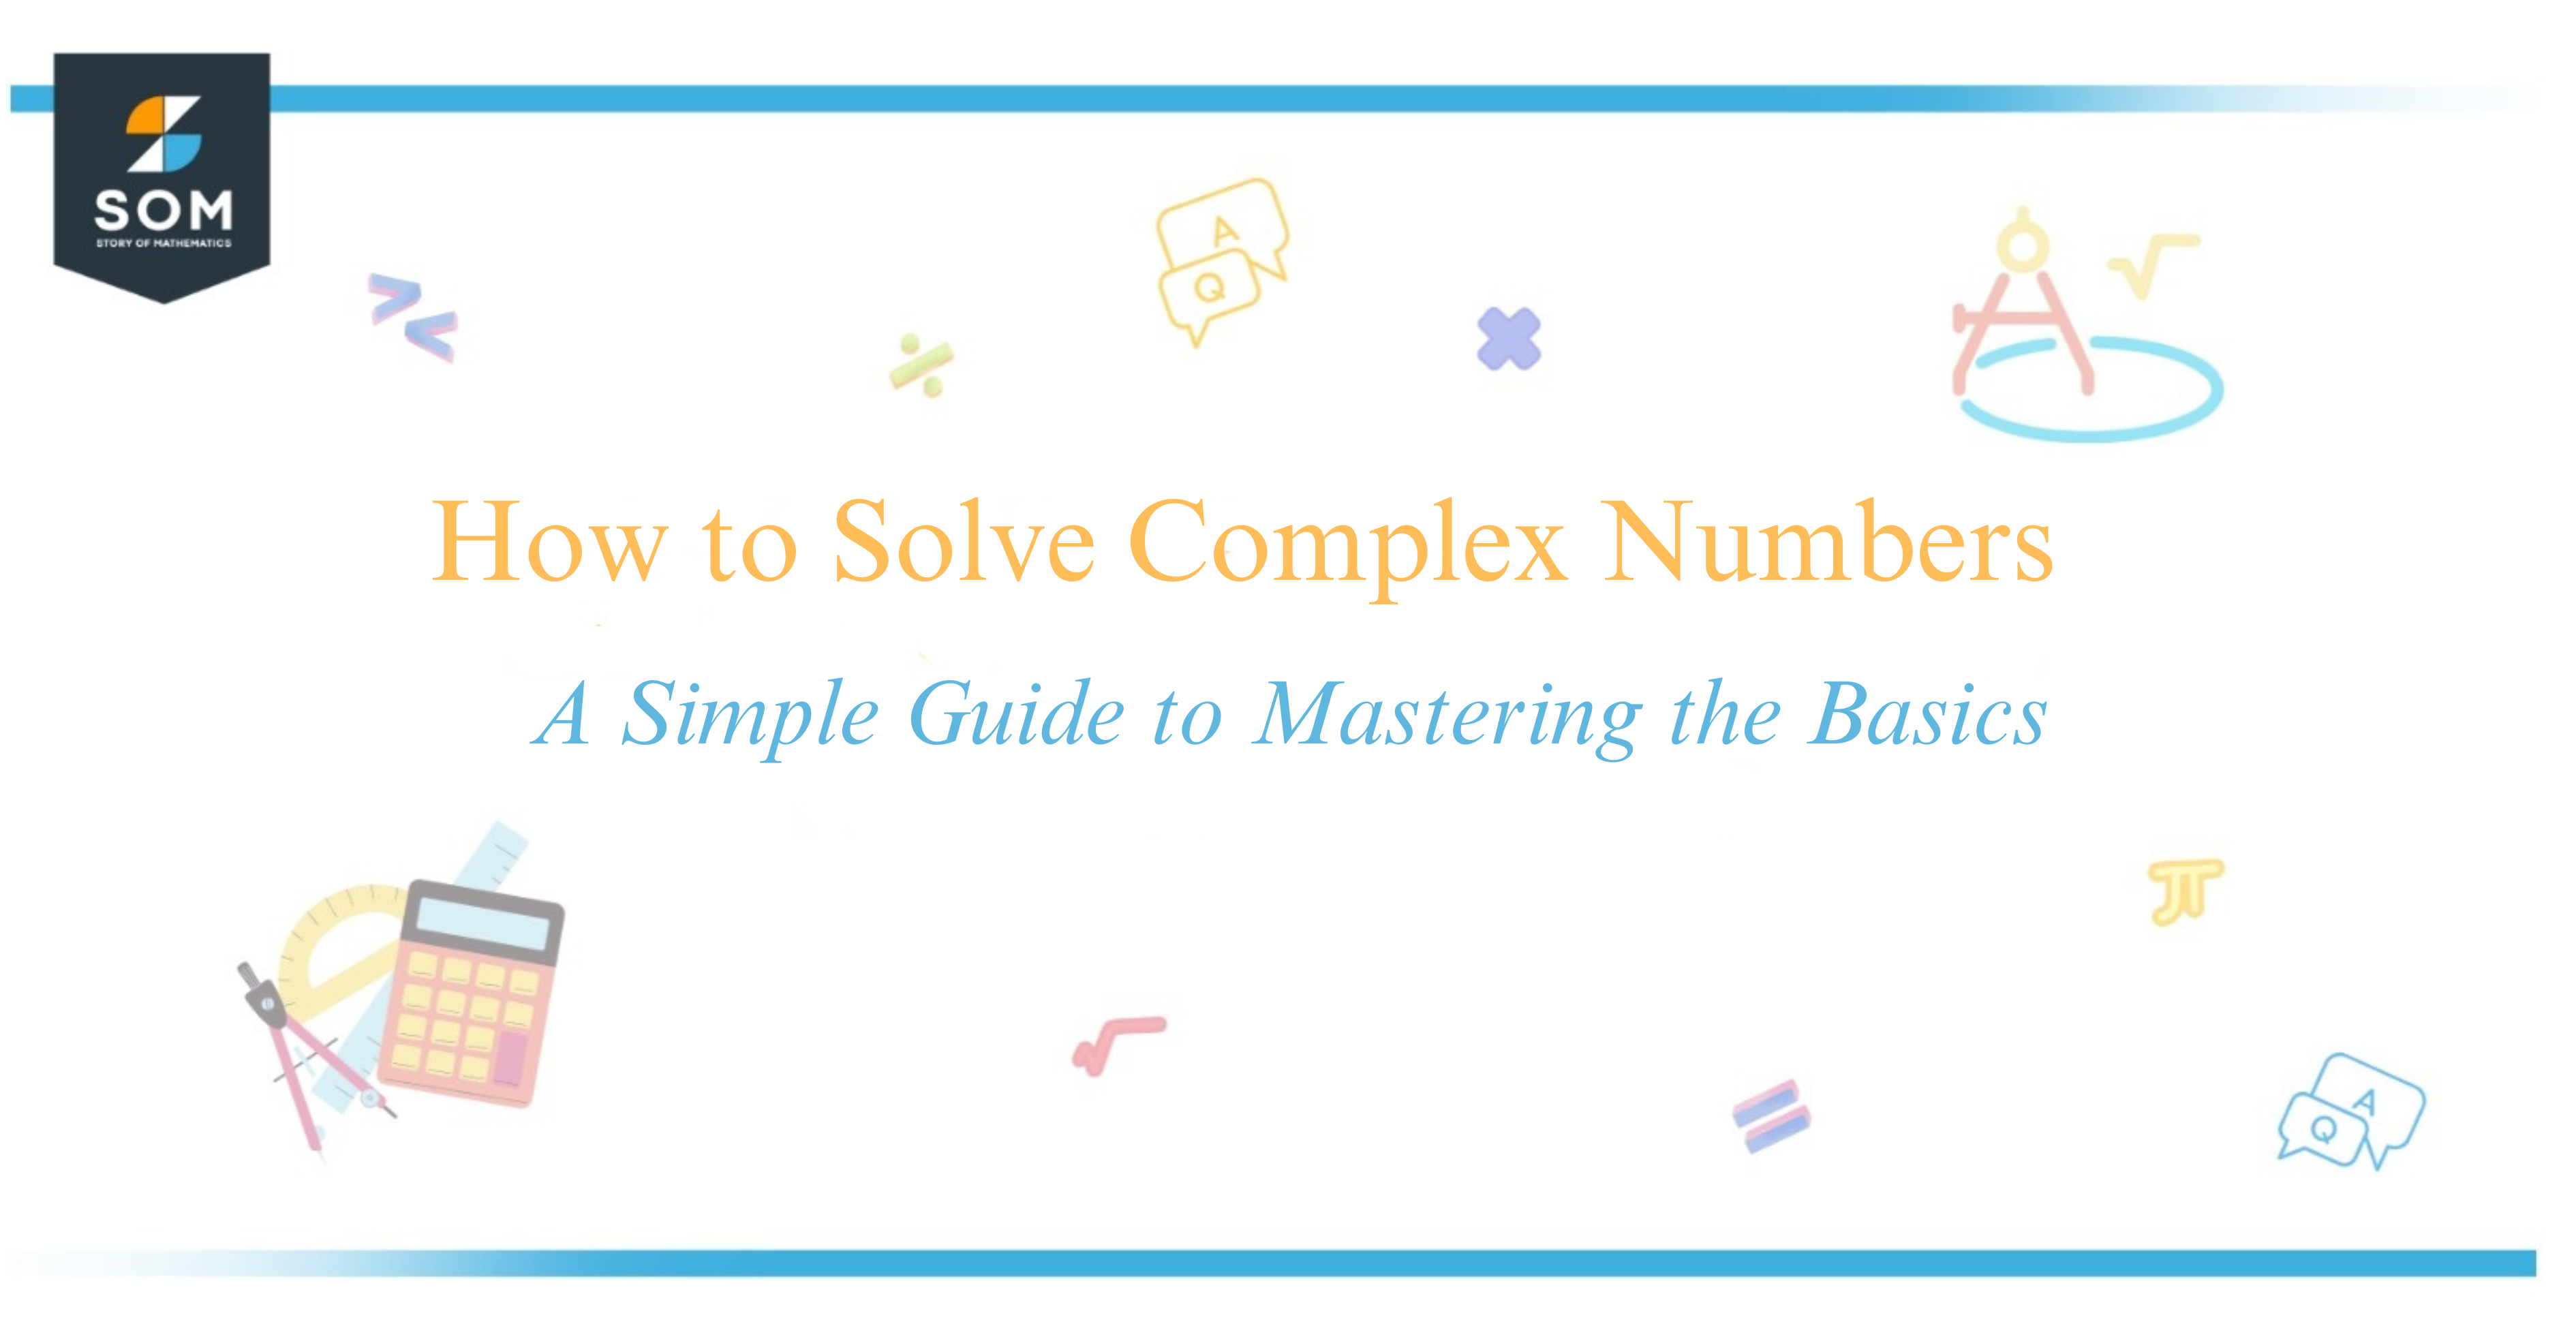 How to Solve Complex Numbers A Simple Guide to Mastering the Basics